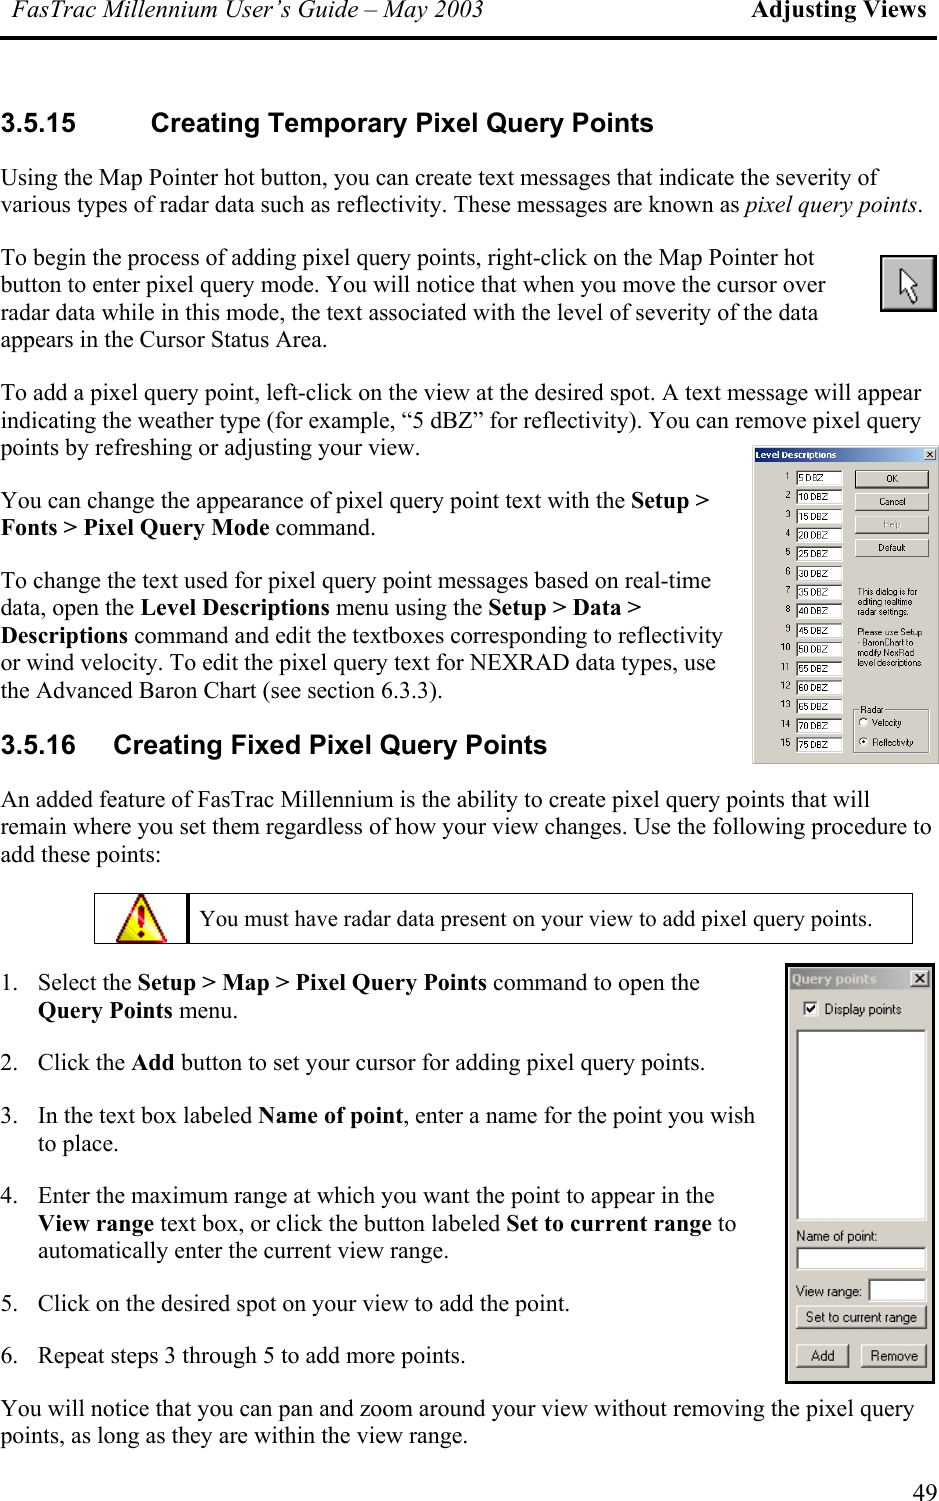 FasTrac Millennium User’s Guide – May 2003 Adjusting Views 3.5.15 Creating Temporary Pixel Query Points Using the Map Pointer hot button, you can create text messages that indicate the severity of various types of radar data such as reflectivity. These messages are known as pixel query points.  To begin the process of adding pixel query points, right-click on the Map Pointer hot button to enter pixel query mode. You will notice that when you move the cursor over radar data while in this mode, the text associated with the level of severity of the data appears in the Cursor Status Area. To add a pixel query point, left-click on the view at the desired spot. A text message will appear indicating the weather type (for example, “5 dBZ” for reflectivity). You can remove pixel query points by refreshing or adjusting your view. You can change the appearance of pixel query point text with the Setup &gt; Fonts &gt; Pixel Query Mode command. To change the text used for pixel query point messages based on real-time data, open the Level Descriptions menu using the Setup &gt; Data &gt; Descriptions command and edit the textboxes corresponding to reflectivity or wind velocity. To edit the pixel query text for NEXRAD data types, use the Advanced Baron Chart (see section 6.3.3). 3.5.16  Creating Fixed Pixel Query Points An added feature of FasTrac Millennium is the ability to create pixel query points that will remain where you set them regardless of how your view changes. Use the following procedure to add these points:  You must have radar data present on your view to add pixel query points. 1. Select the Setup &gt; Map &gt; Pixel Query Points command to open the Query Points menu. 2. Click the Add button to set your cursor for adding pixel query points. 3.  In the text box labeled Name of point, enter a name for the point you wish to place. 4.  Enter the maximum range at which you want the point to appear in the View range text box, or click the button labeled Set to current range to automatically enter the current view range. 5.  Click on the desired spot on your view to add the point. 6.  Repeat steps 3 through 5 to add more points. You will notice that you can pan and zoom around your view without removing the pixel query points, as long as they are within the view range. 49 